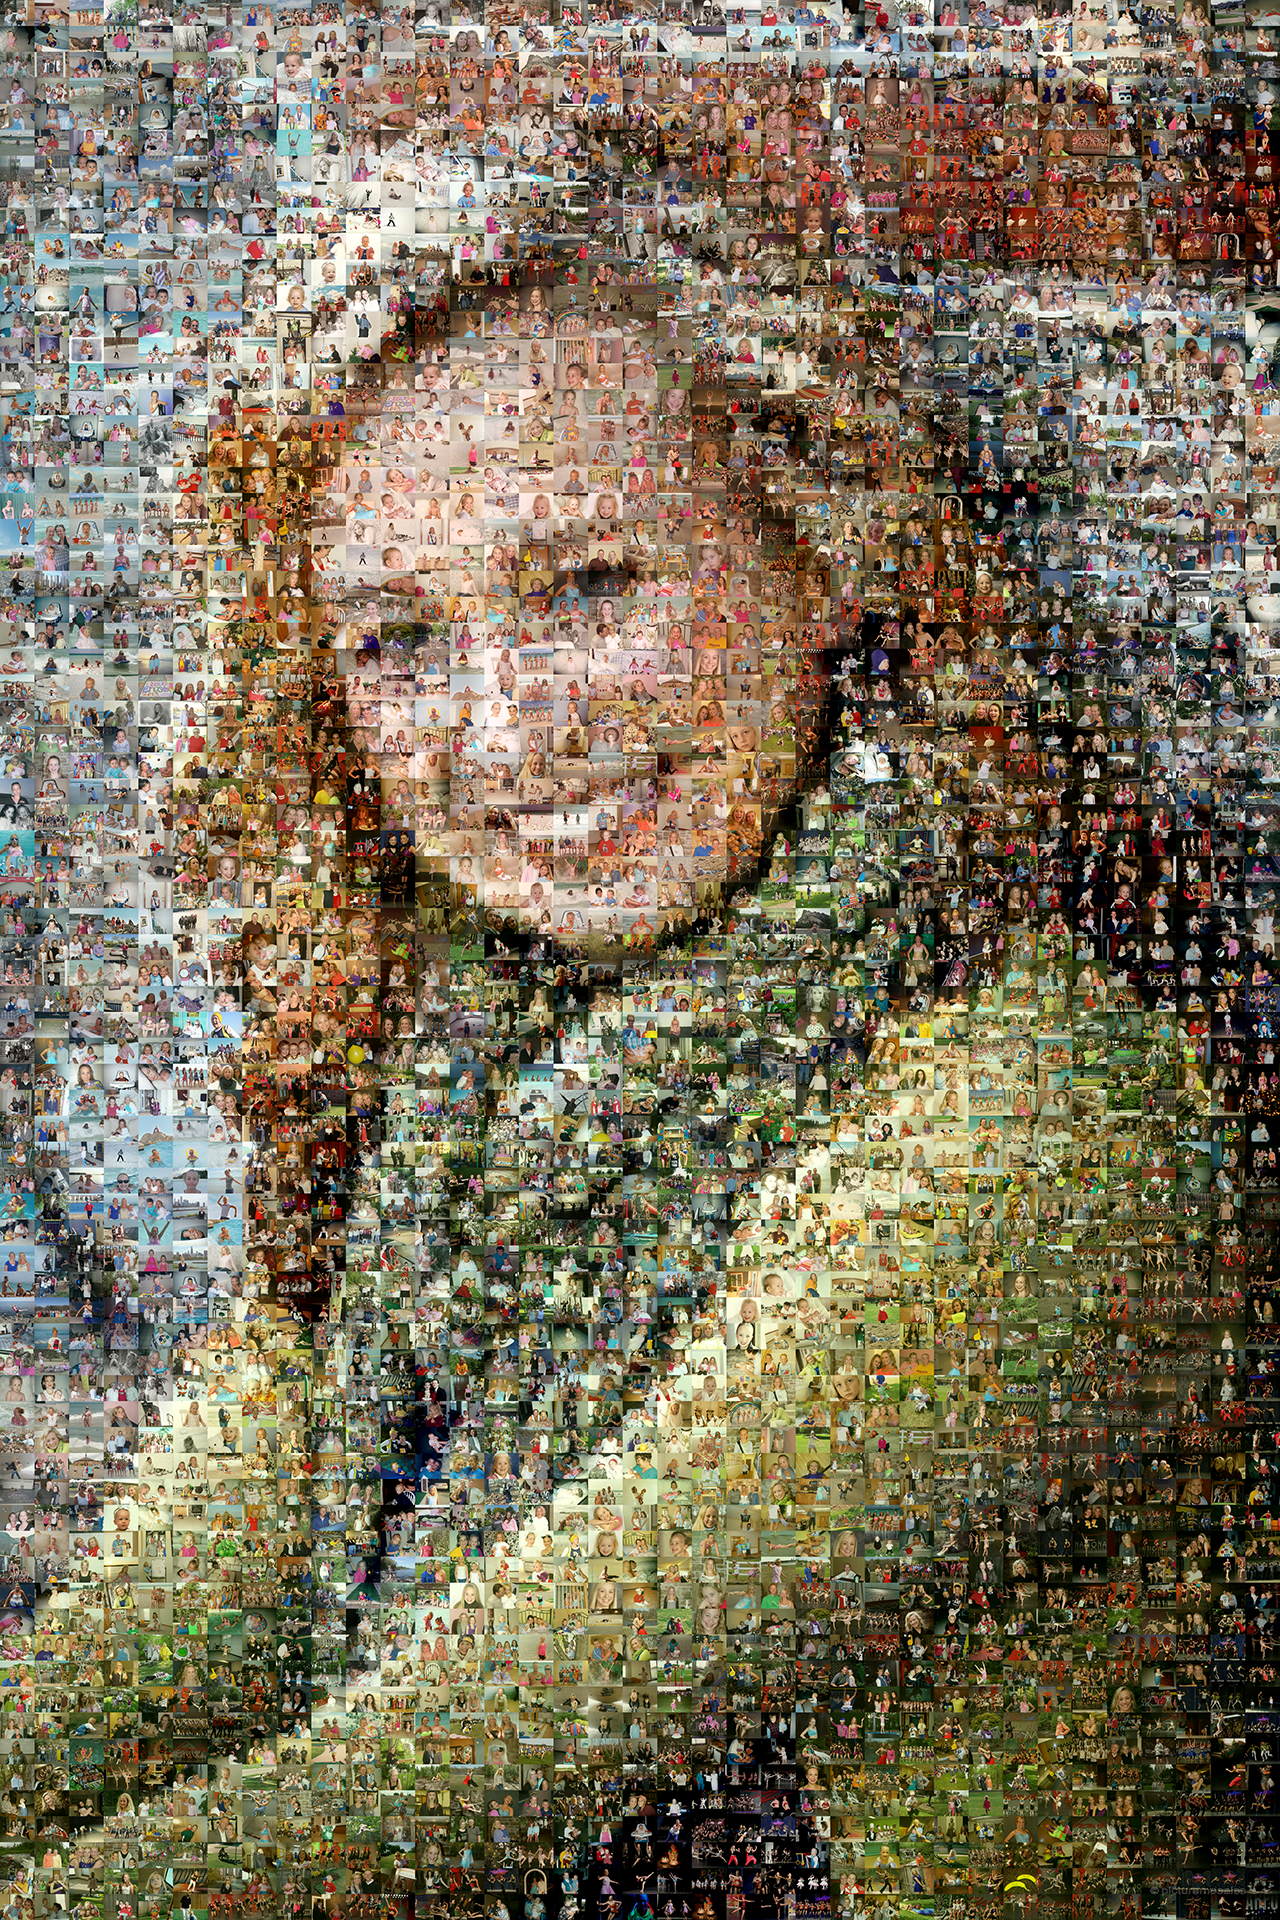 photo mosaic created using over 3600 photos of family and friends